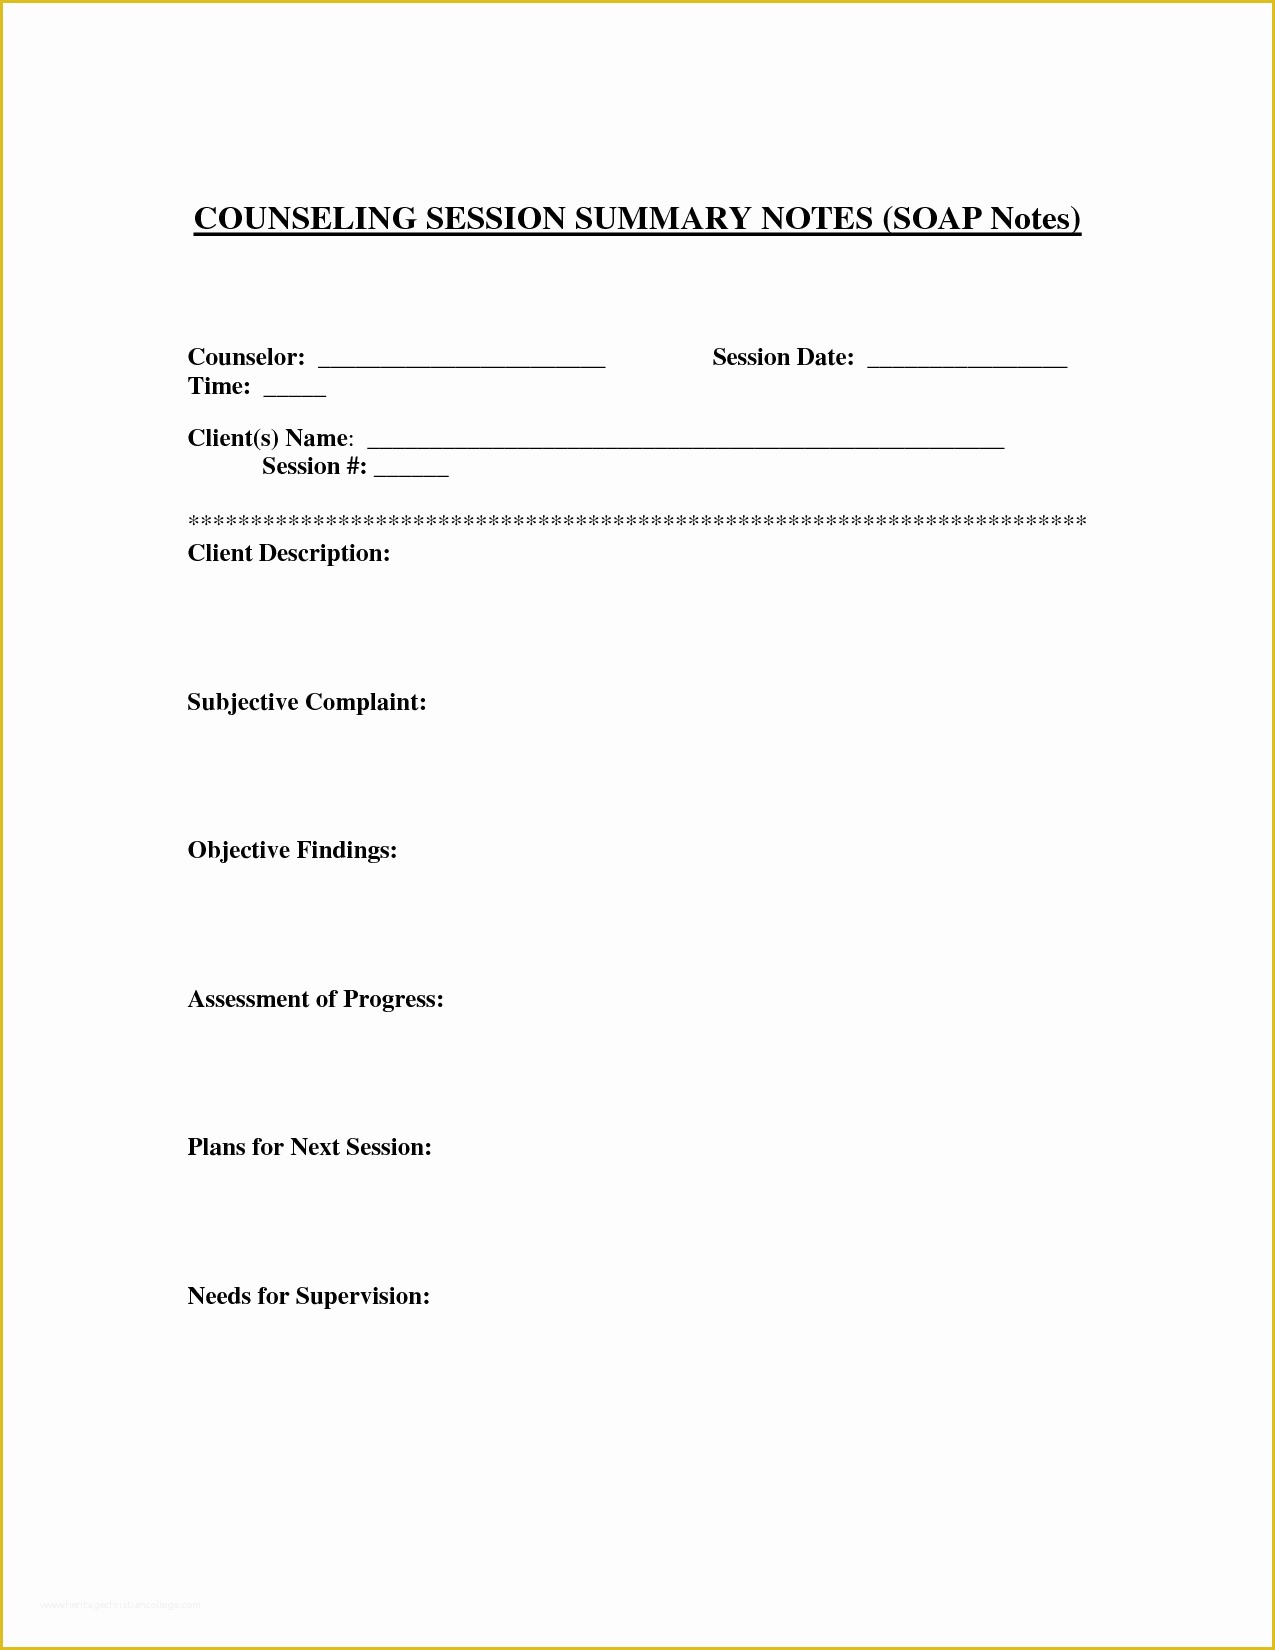 Free therapy Notes Template Of soap Notes Template for Counseling Google Search